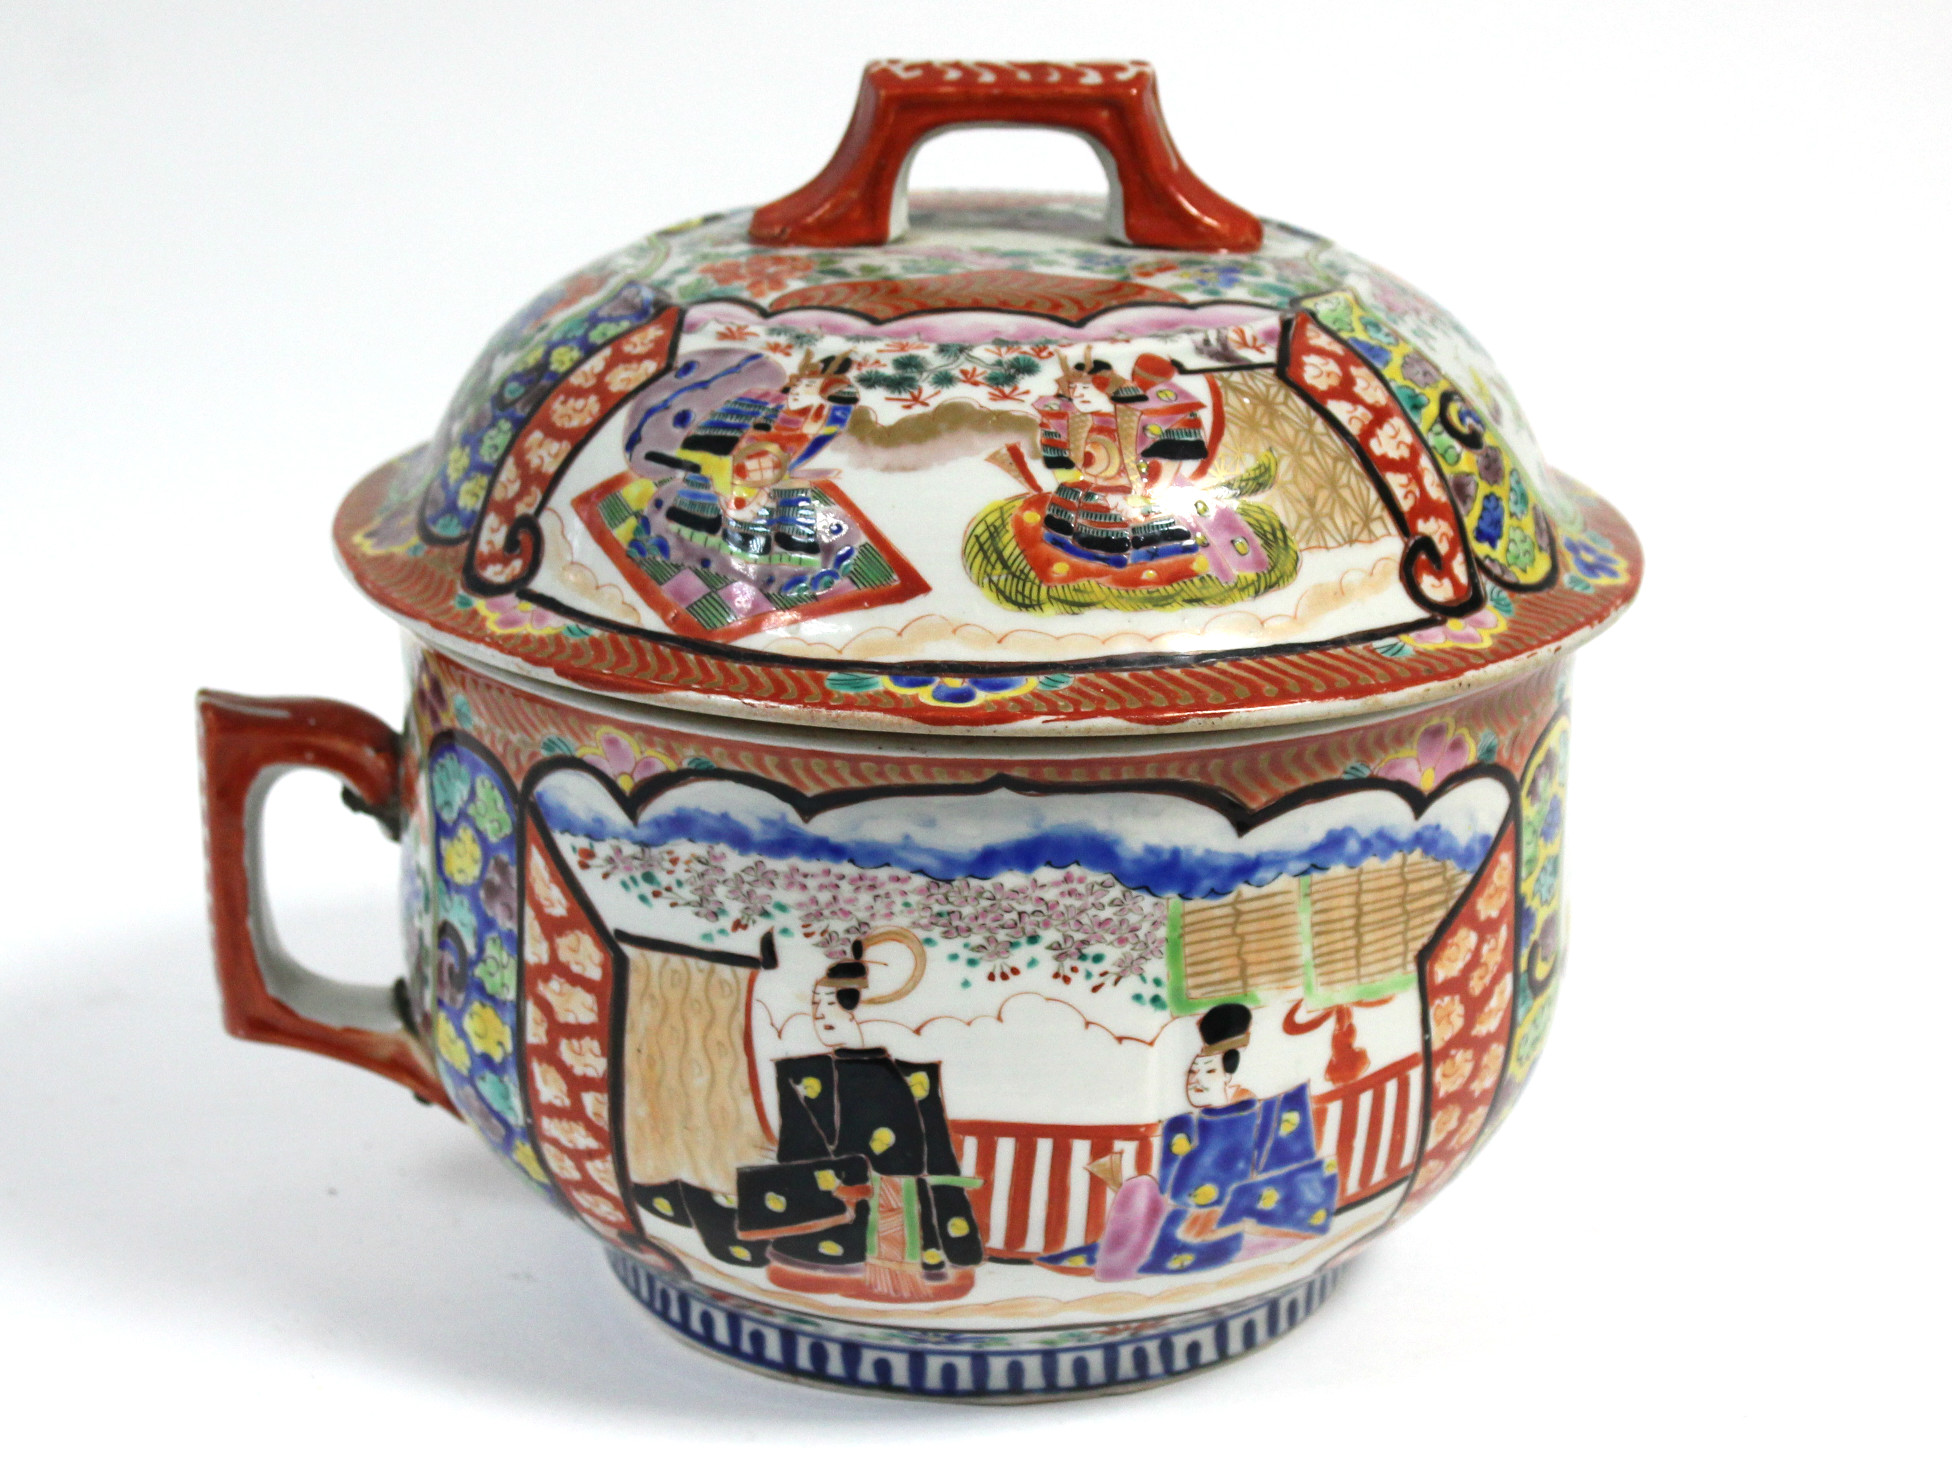 A 19th century Japanese Kutani chamber pot with domed cover & painted figure decoration, 8¾”